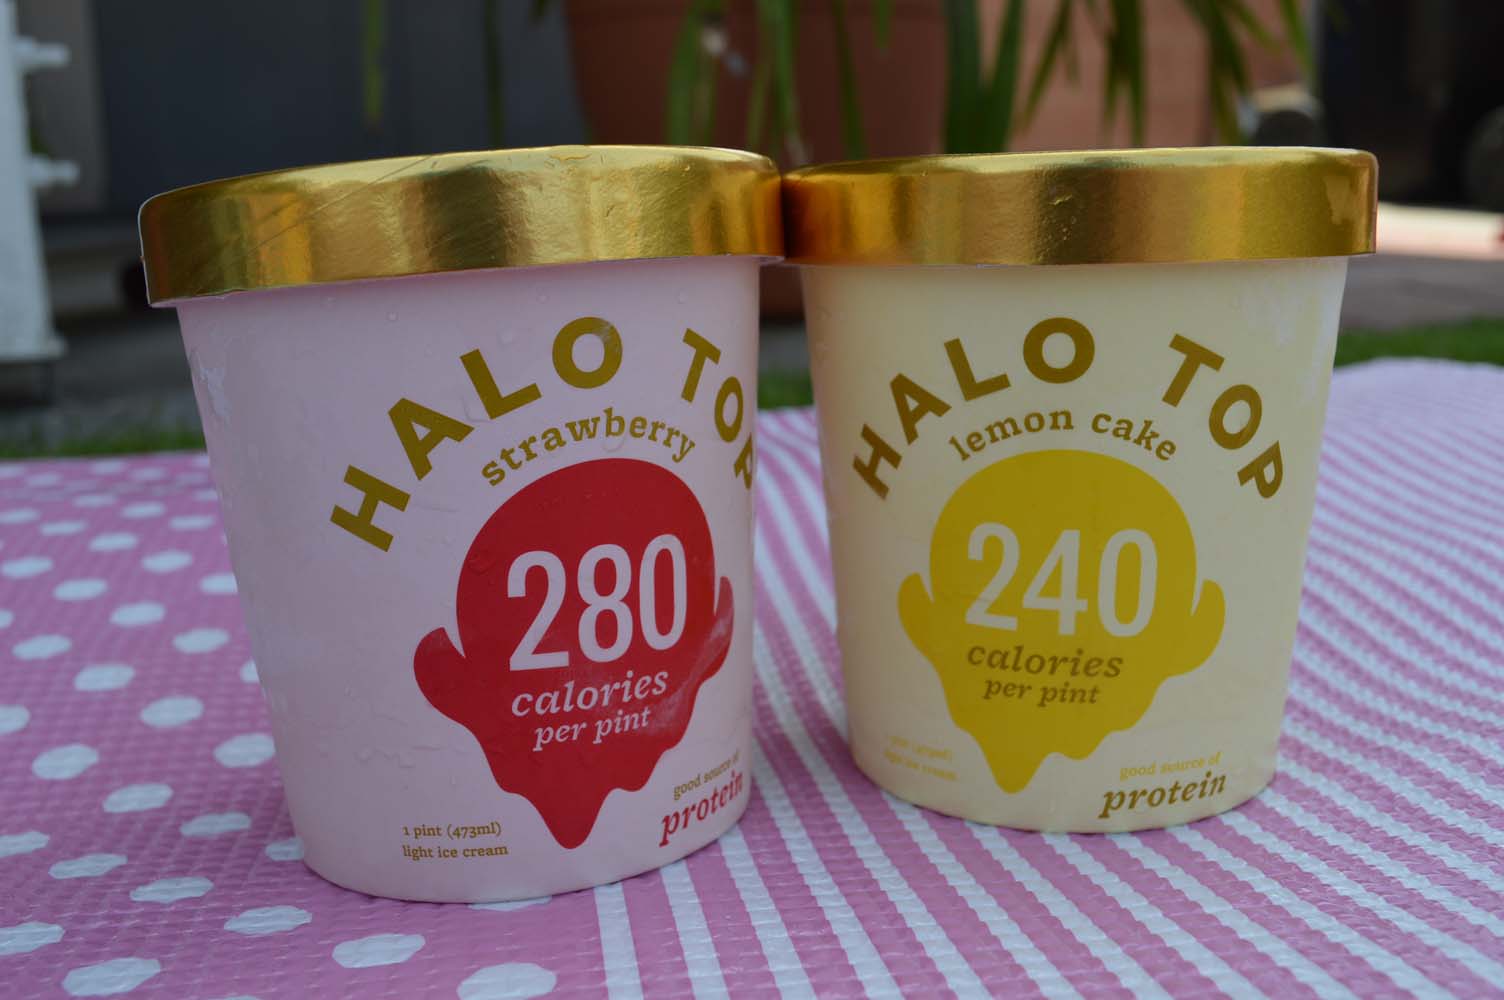 Halo Top Creamery - Sometimes you gotta be a little bad, ya know